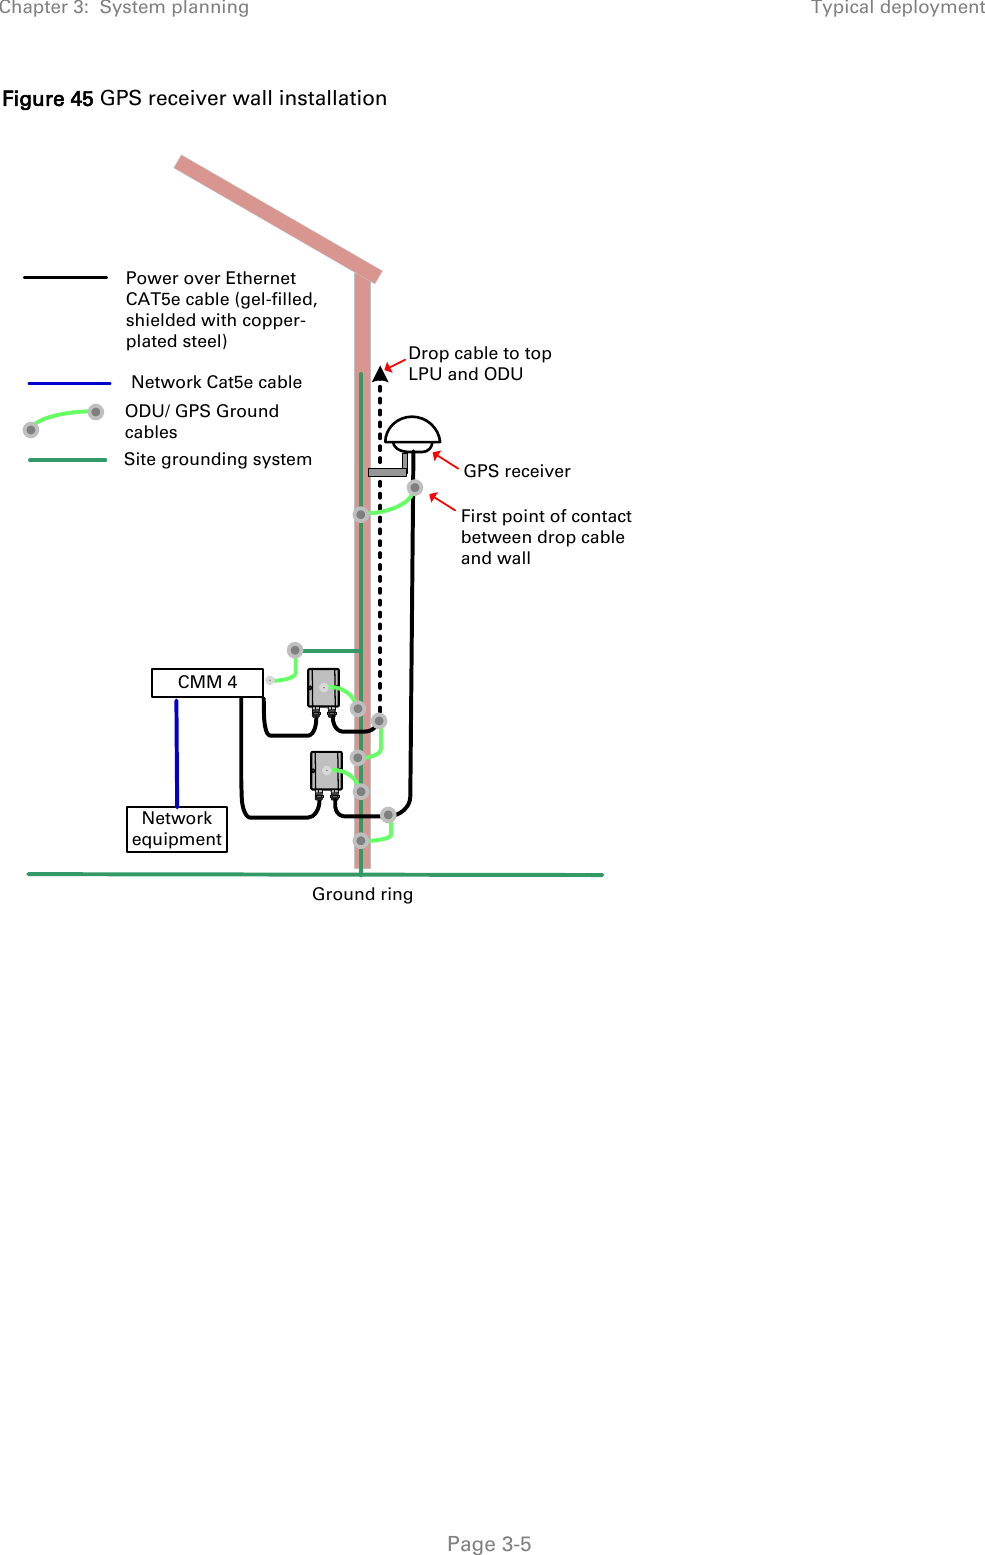 Chapter 3:  System planning Typical deployment   Page 3-5 Figure 45 GPS receiver wall installation  NetworkequipmentODU/ GPS Ground cablesSite grounding systemDrop cable to top LPU and ODUGround ringPower over Ethernet CAT5e cable (gel-filled, shielded with copper-plated steel)Network Cat5e cableCMM 4GPS receiverFirst point of contact between drop cable and wall      